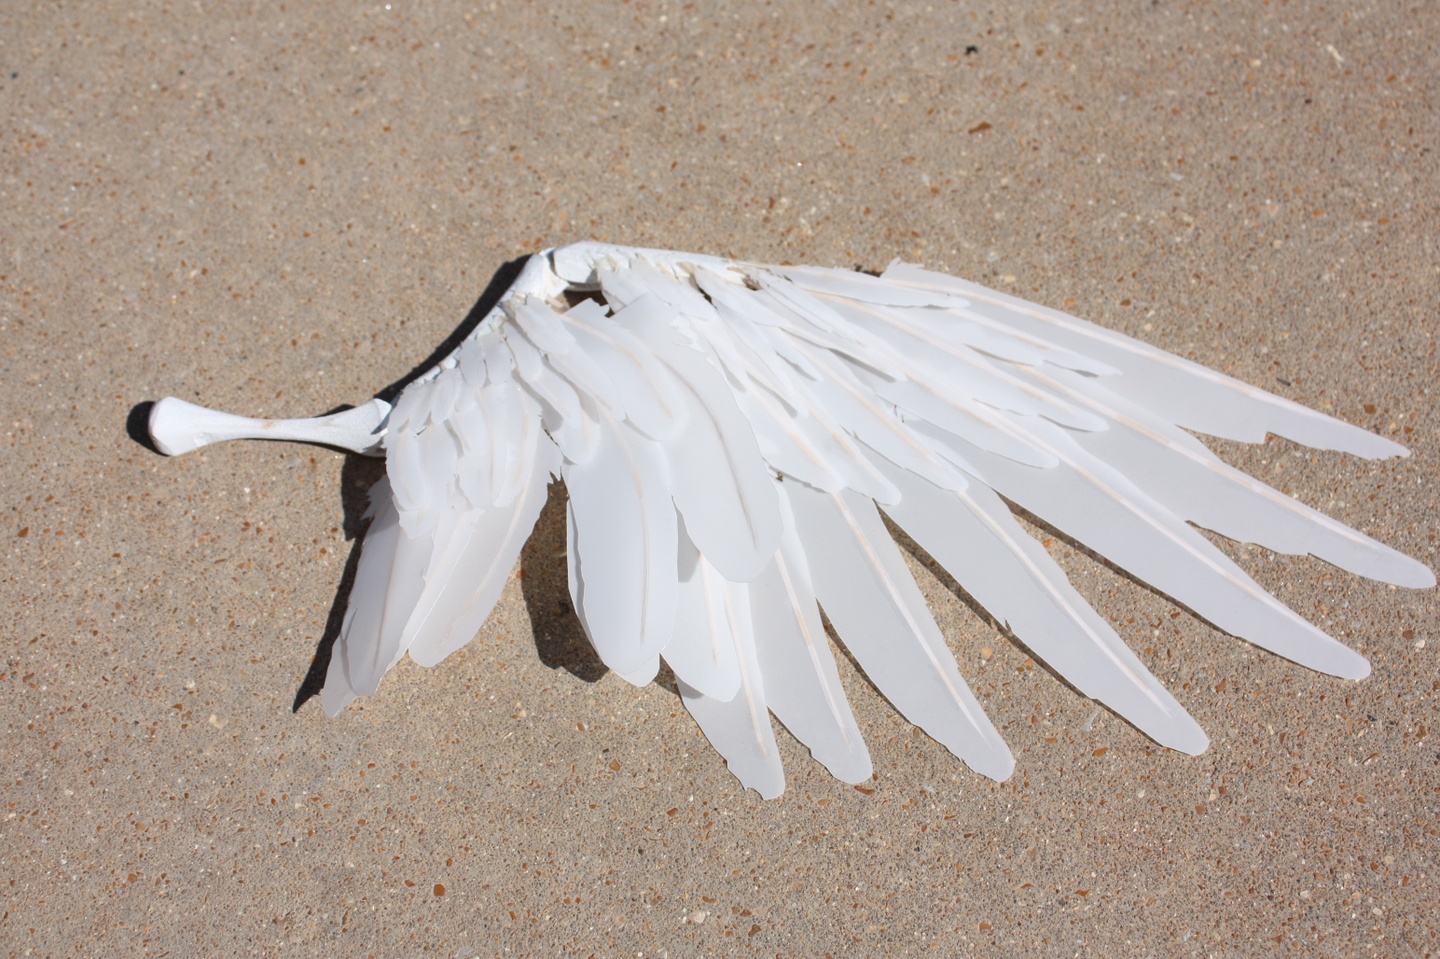 Model of a bird wing with feathers constructed from a semi-translucent white material with wooden ribs.